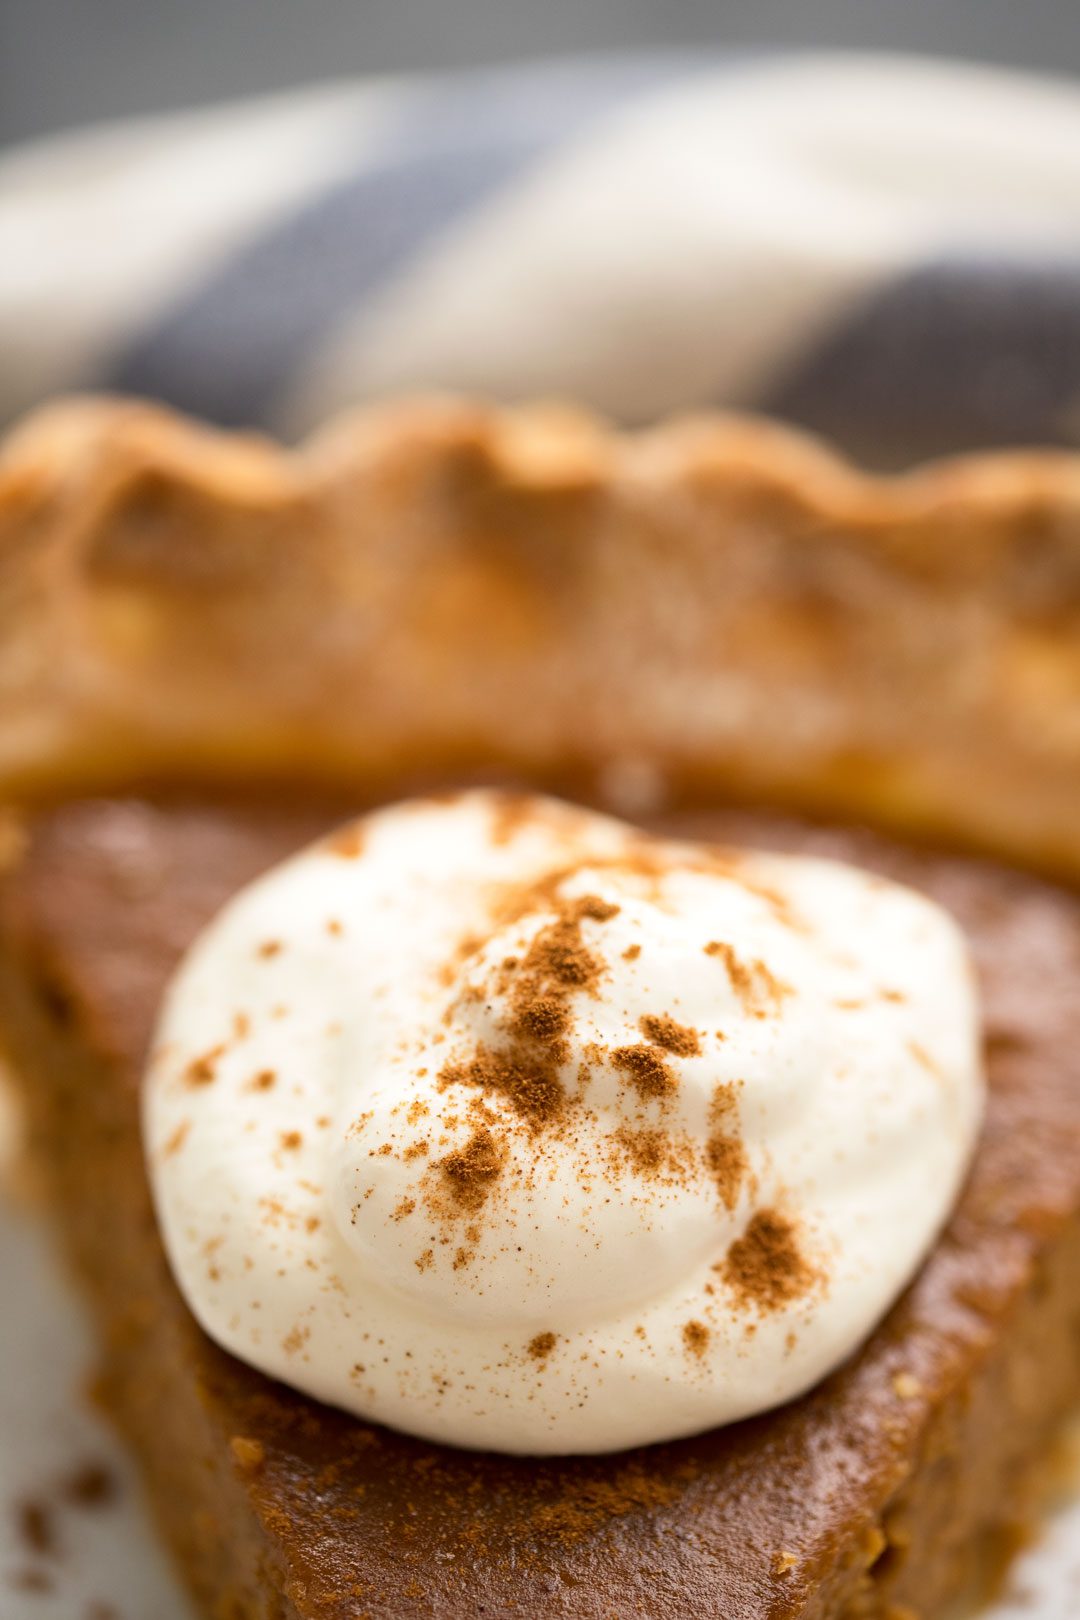 A single serving of pumpkin pie topped with whipped cream and cinnamon.